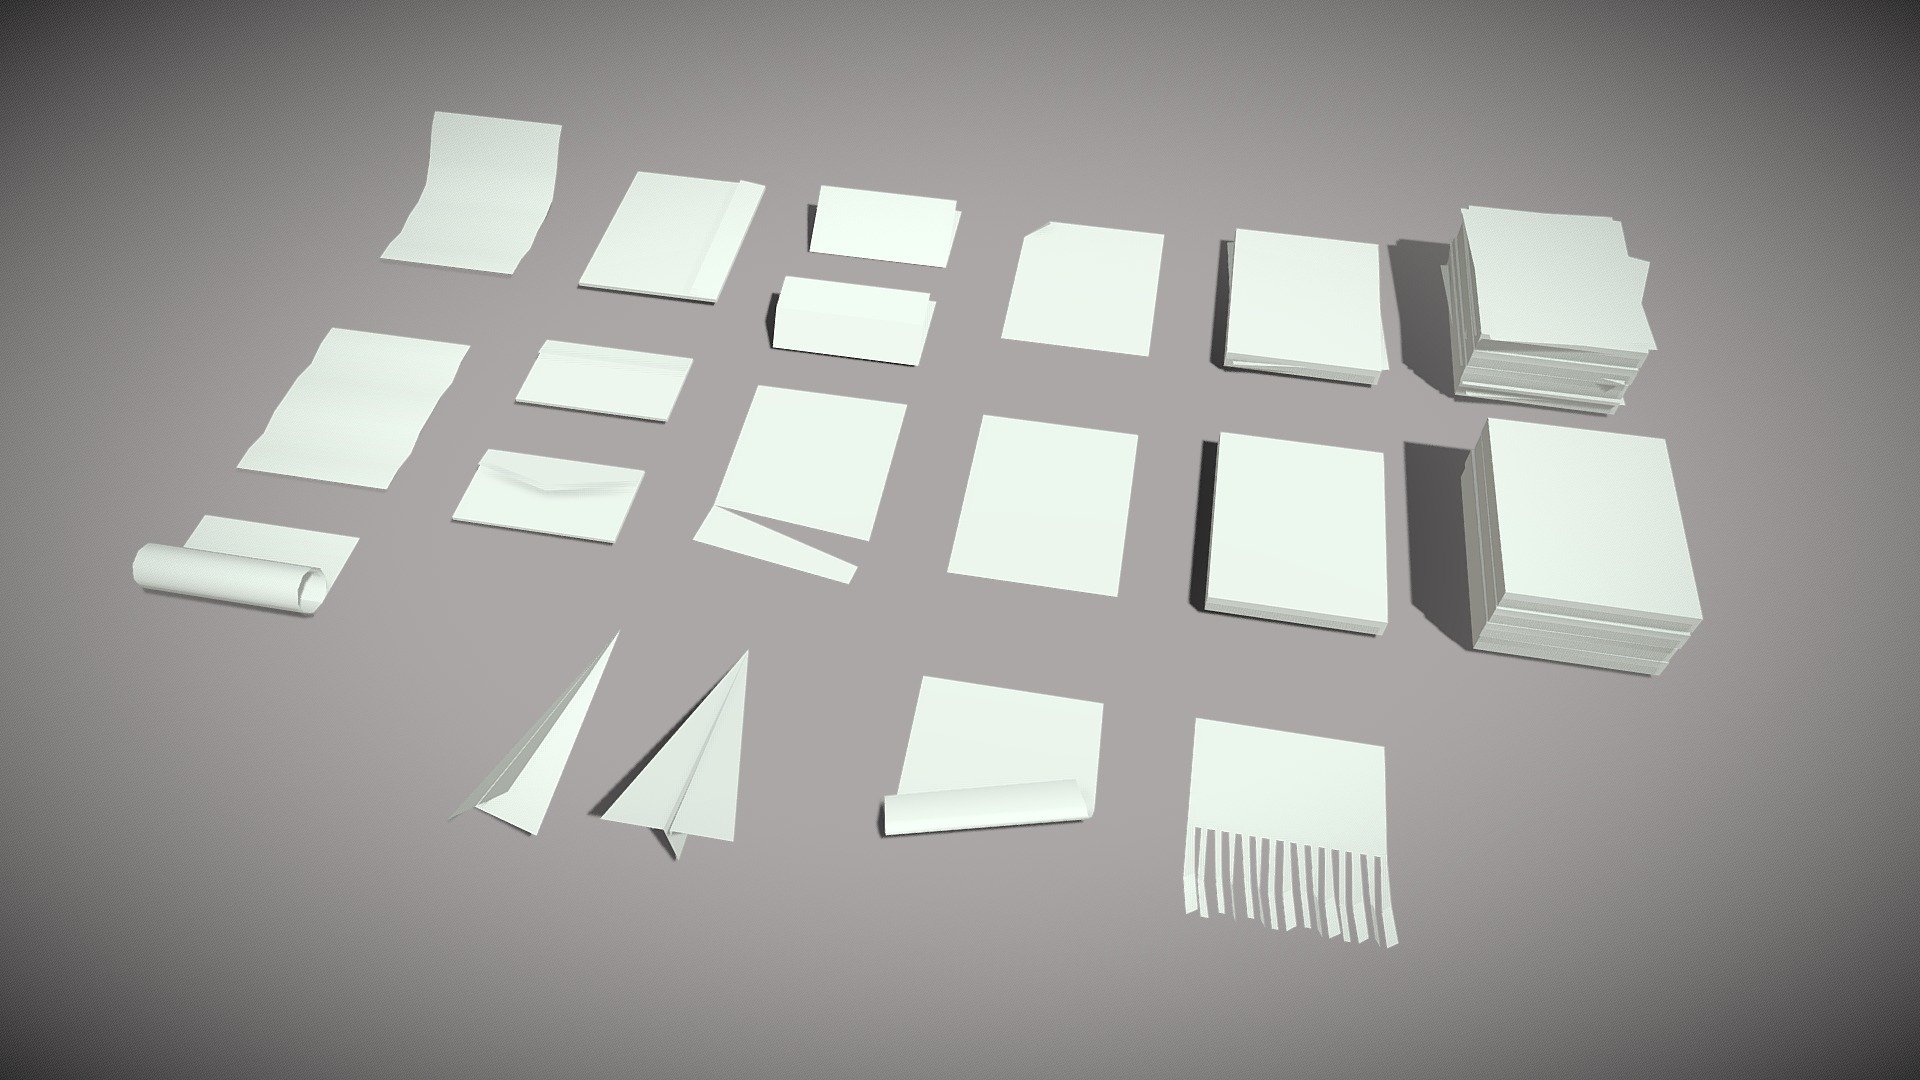 Paper, Envelope, Plane.

No textures or uv channels, one shared material 3d model